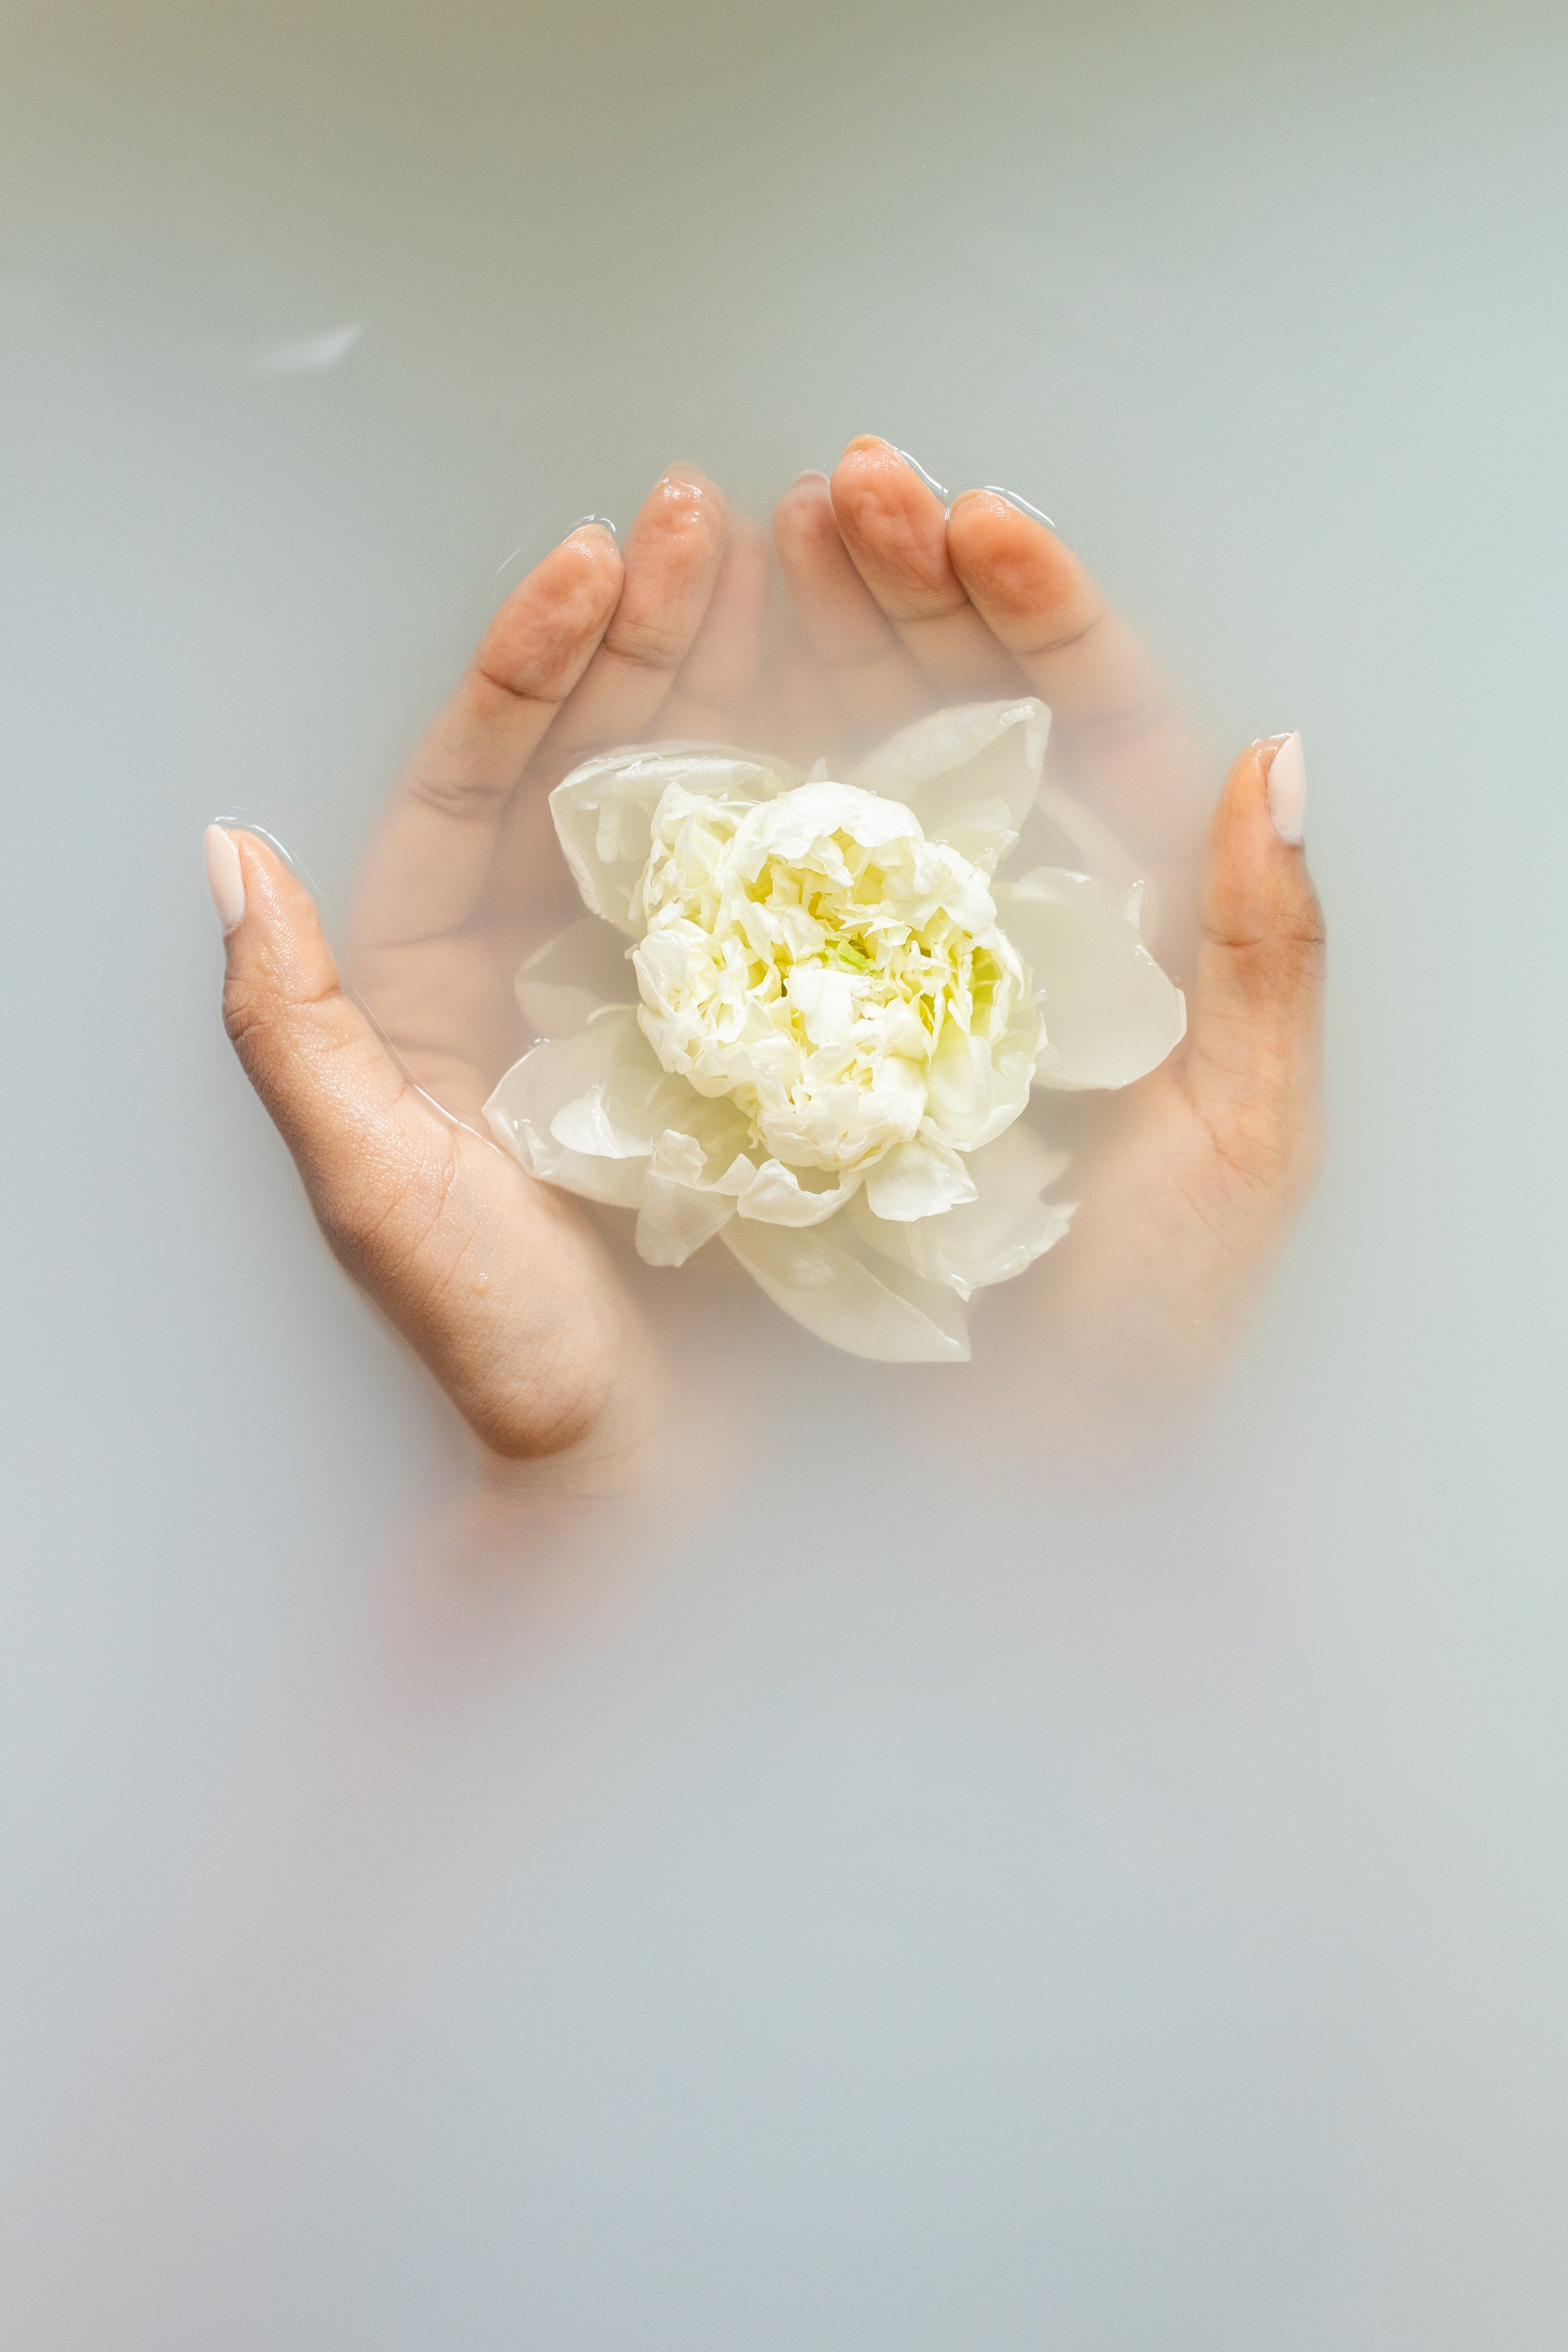 Hands holding a white flower in a cloudy white water bath.